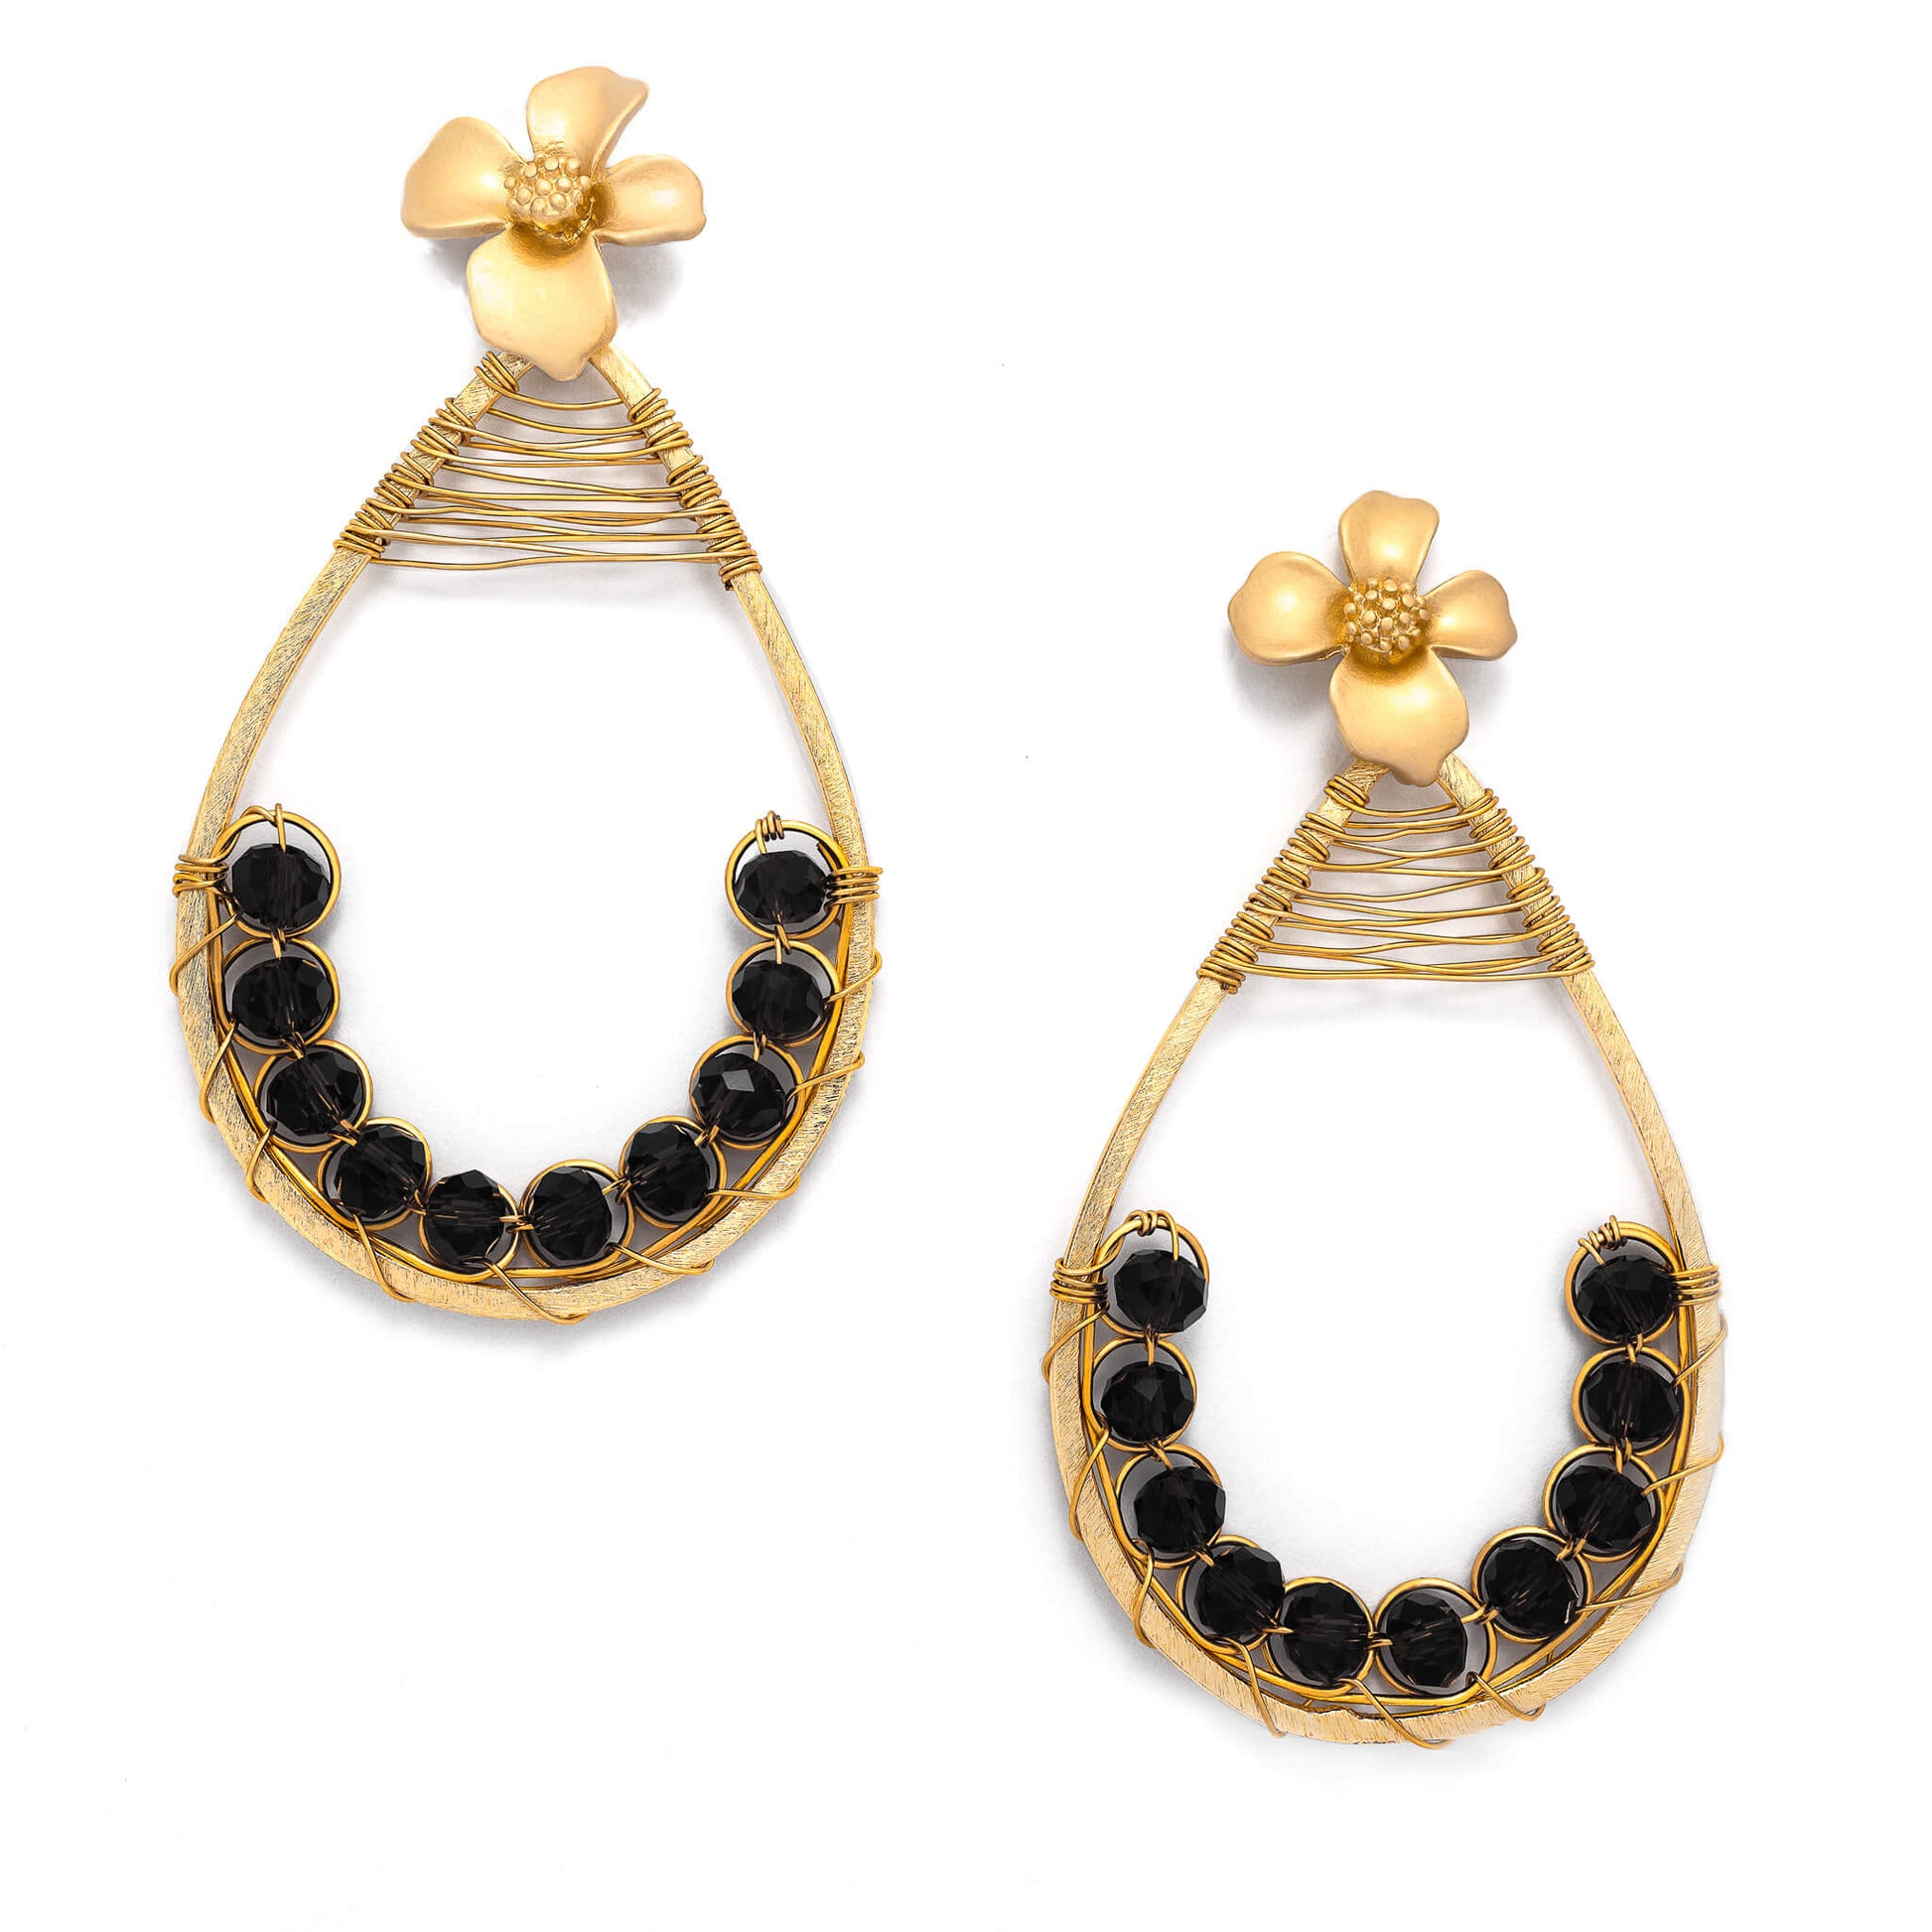 Emma teardrop Earrings are 3 inches long. Gold and Black earrings Handmade with faceted Beads Crystals, gold-plated wire, and a metal frame. Beaded earrings for women